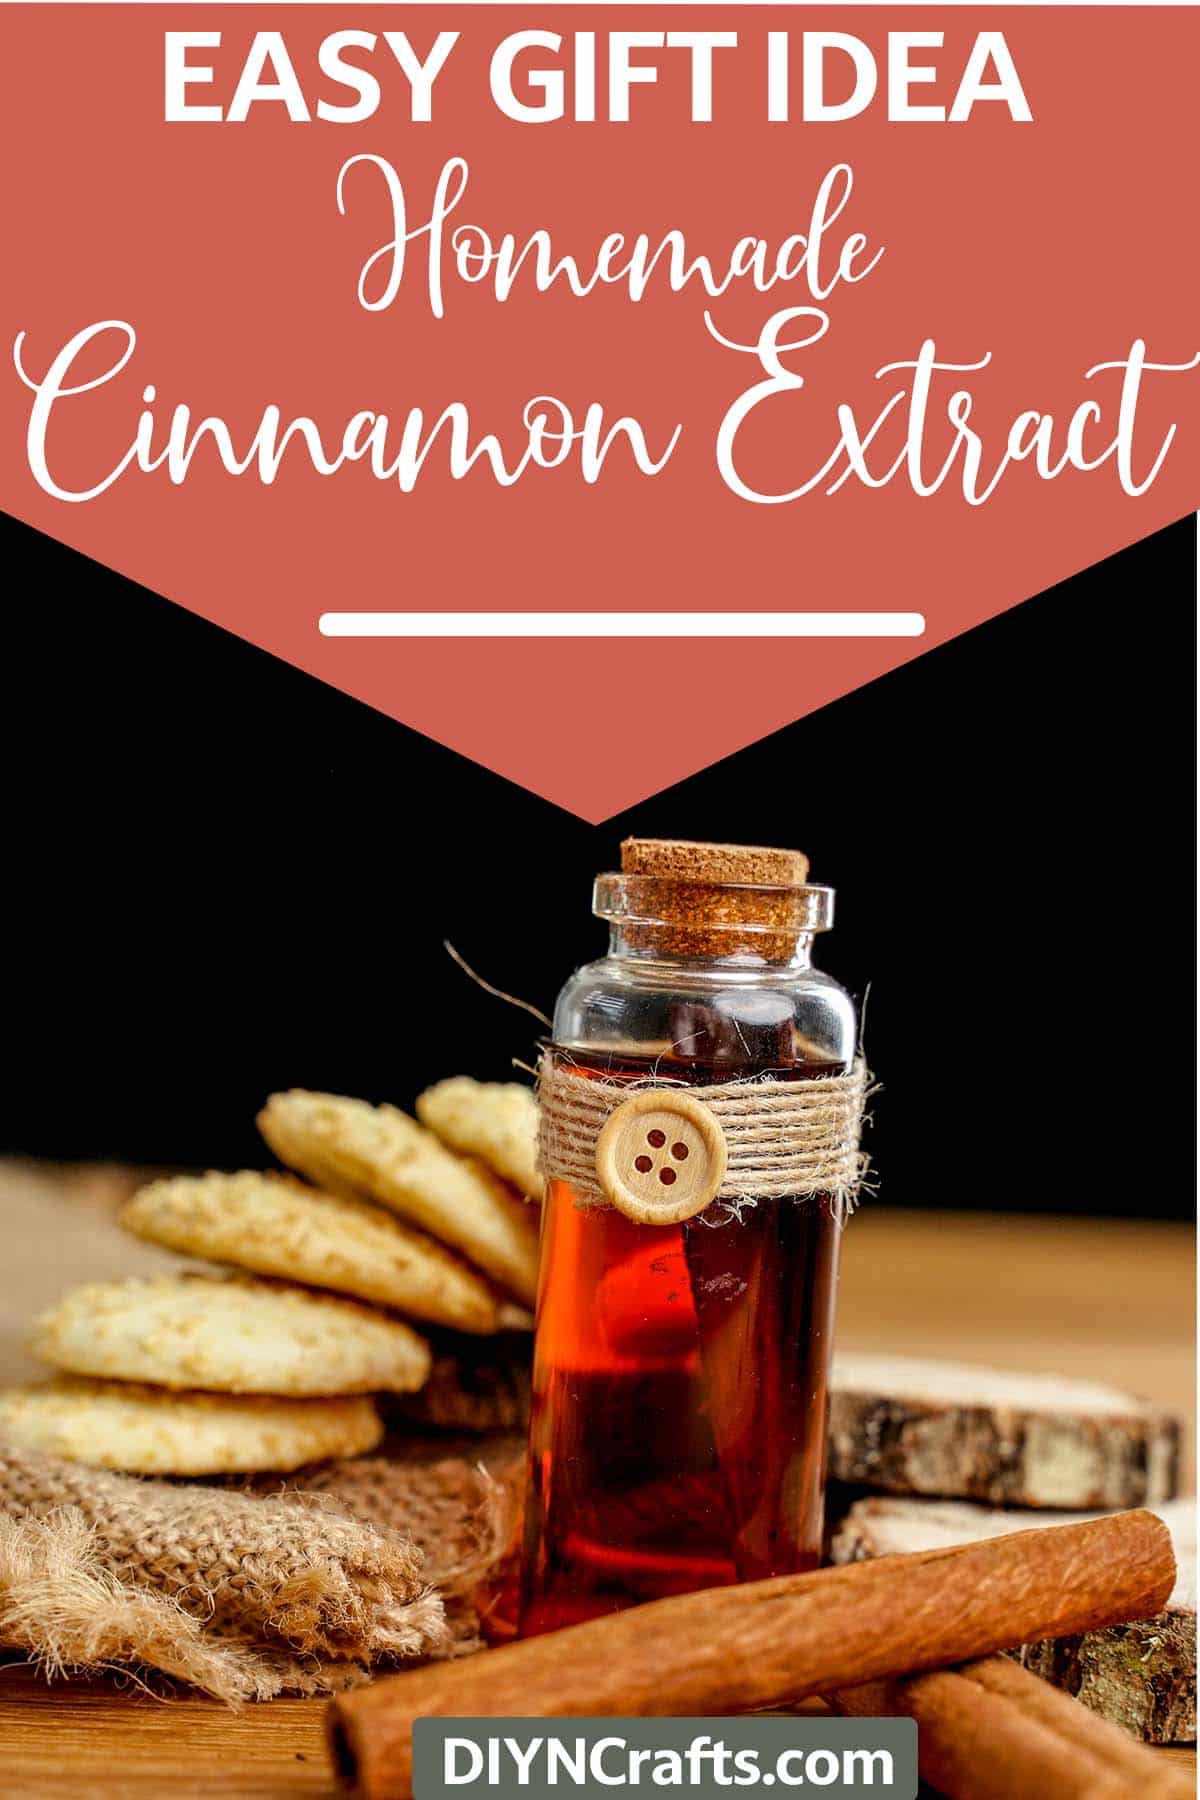 bottle of diy cinnamon extract with text which reads easy gift idea homemade cinnamon extract